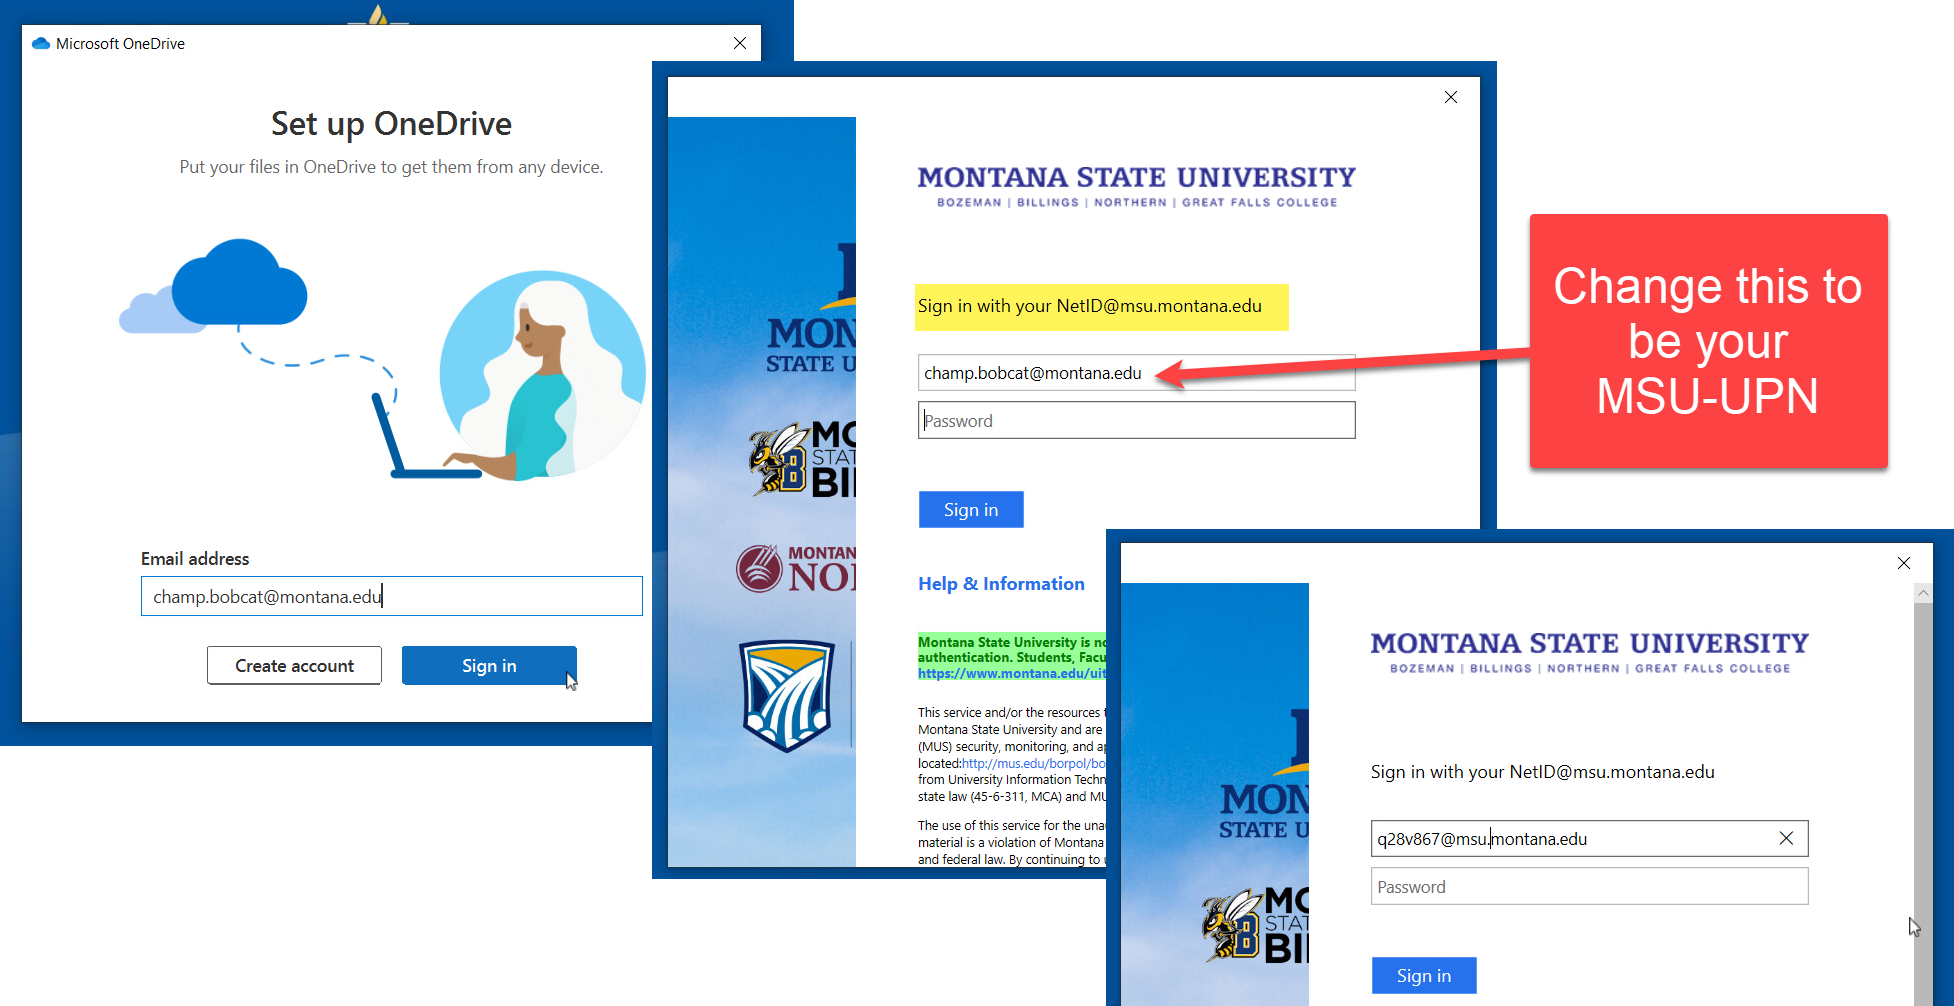 sign in images showing changing email to be the MSU-UPN